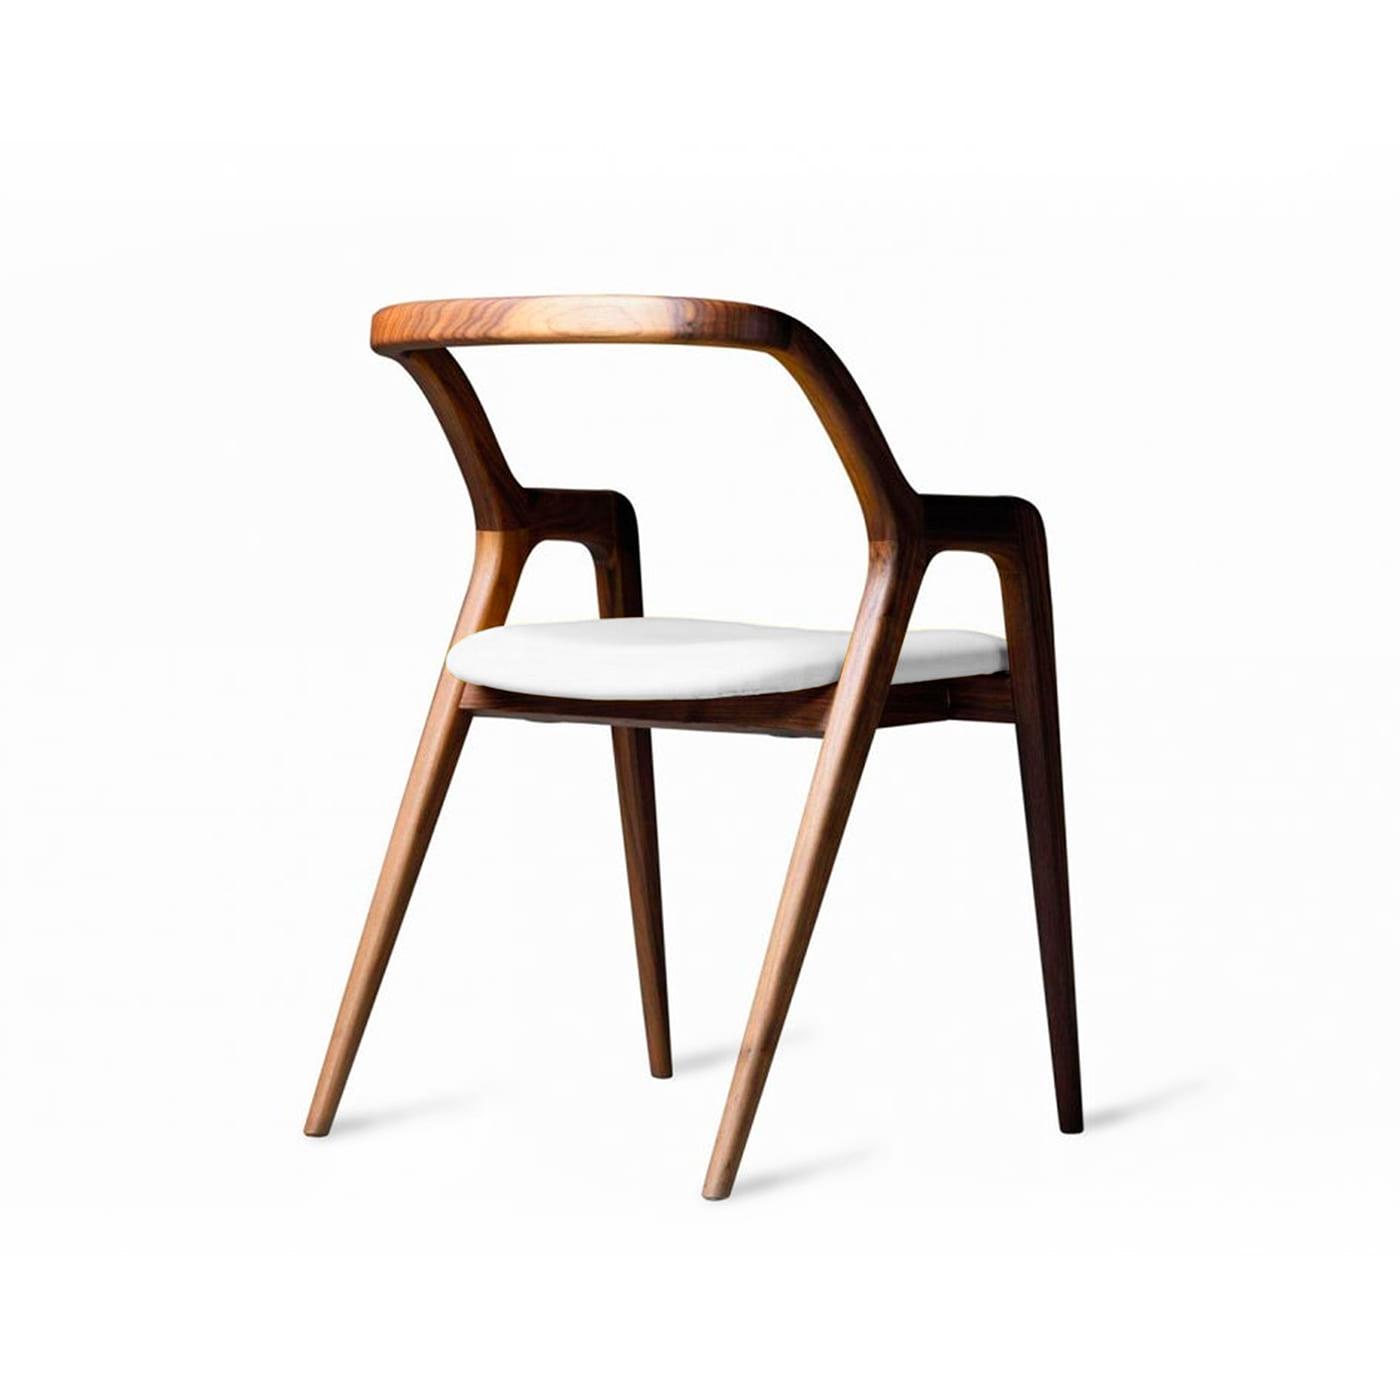 In Breve Natural Solid Walnut Chair ☞ Upholstery: Leather PANDORA 620